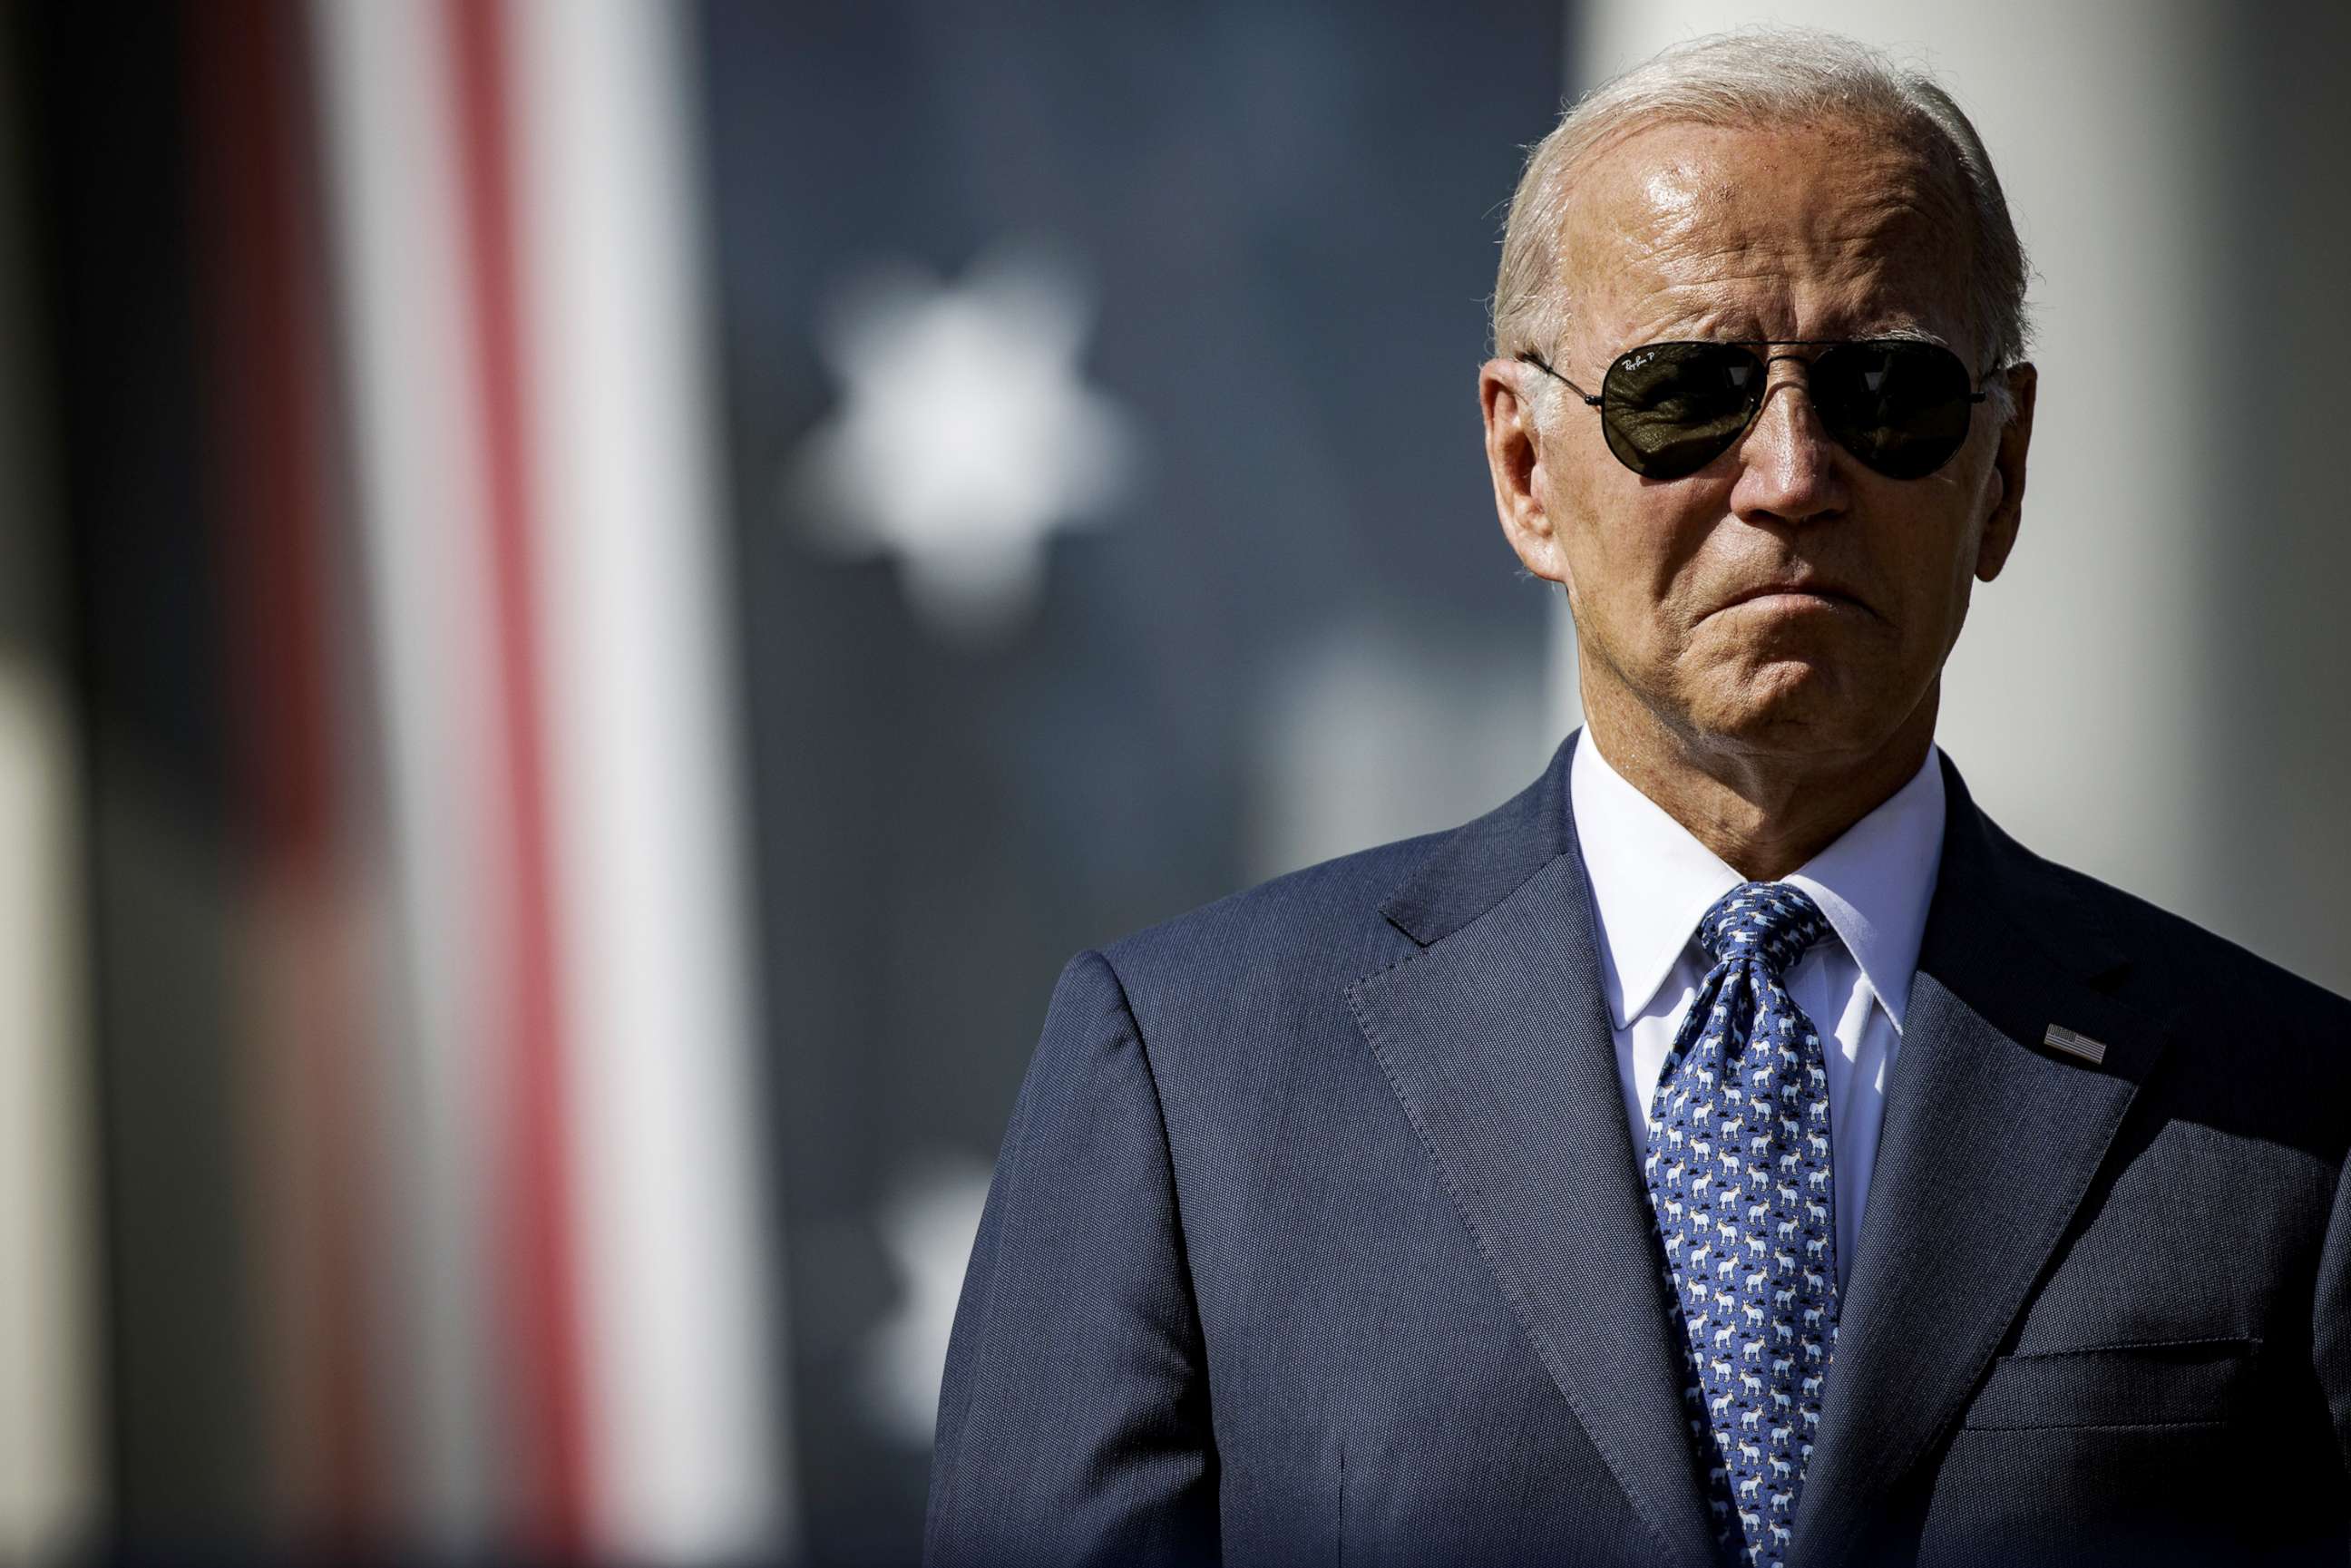 PHOTO: President Joe Biden attends an event on the South Lawn of the White House in Washington, Sept. 13, 2022.